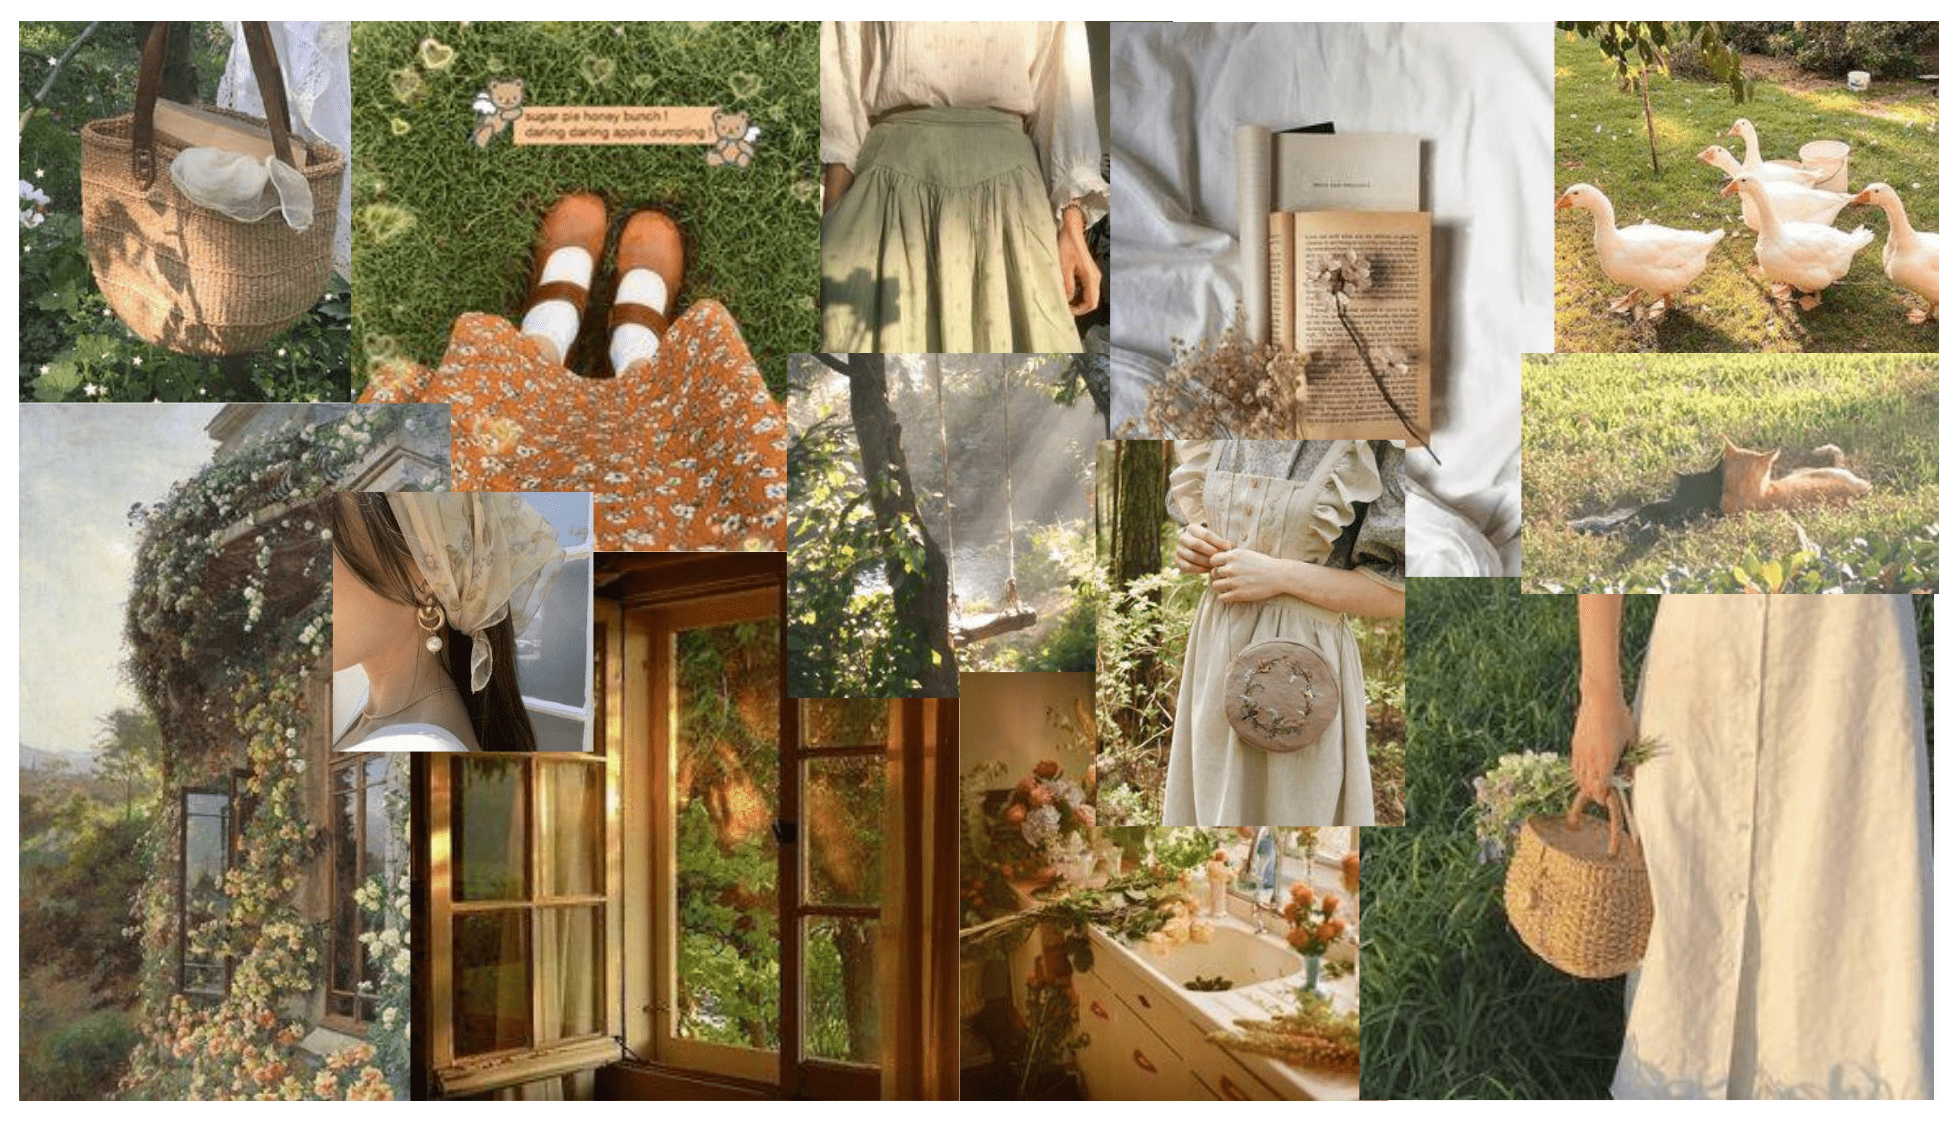 A collage of pictures including vintage dresses, a basket bag, and a garden. - Cottagecore, Goblincore